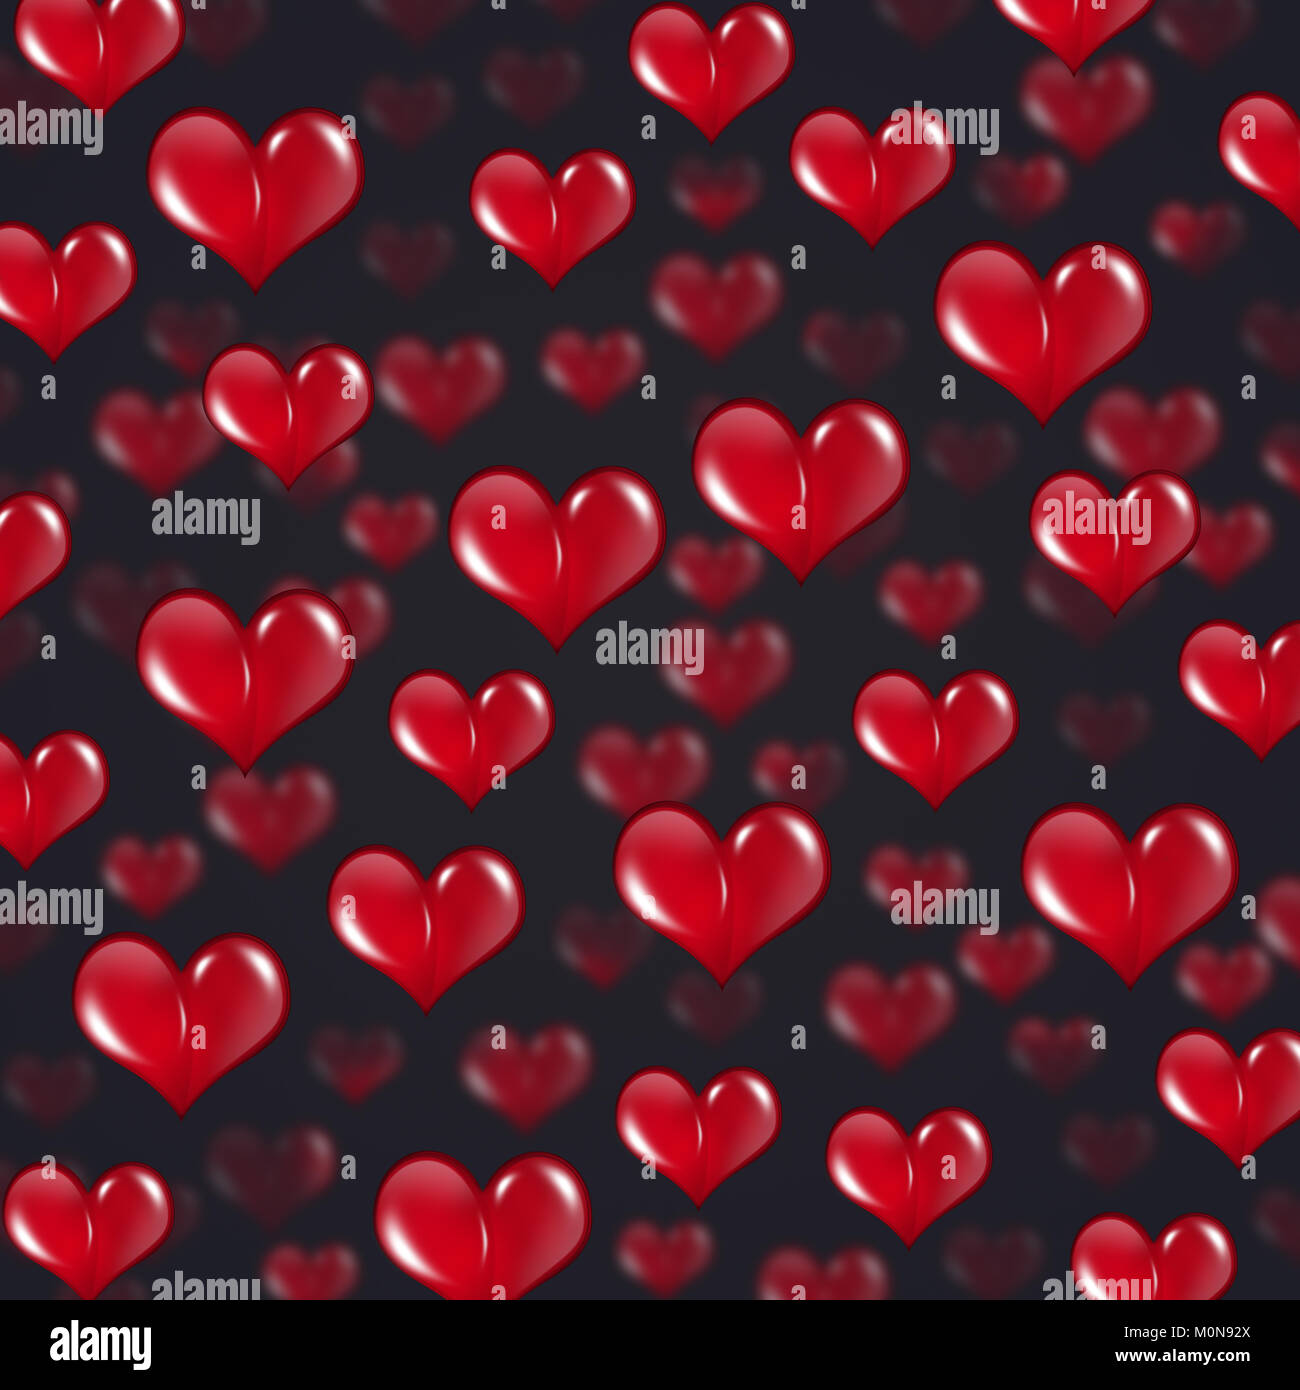 falling valentine red hearts abstract holiday background Stock Photo